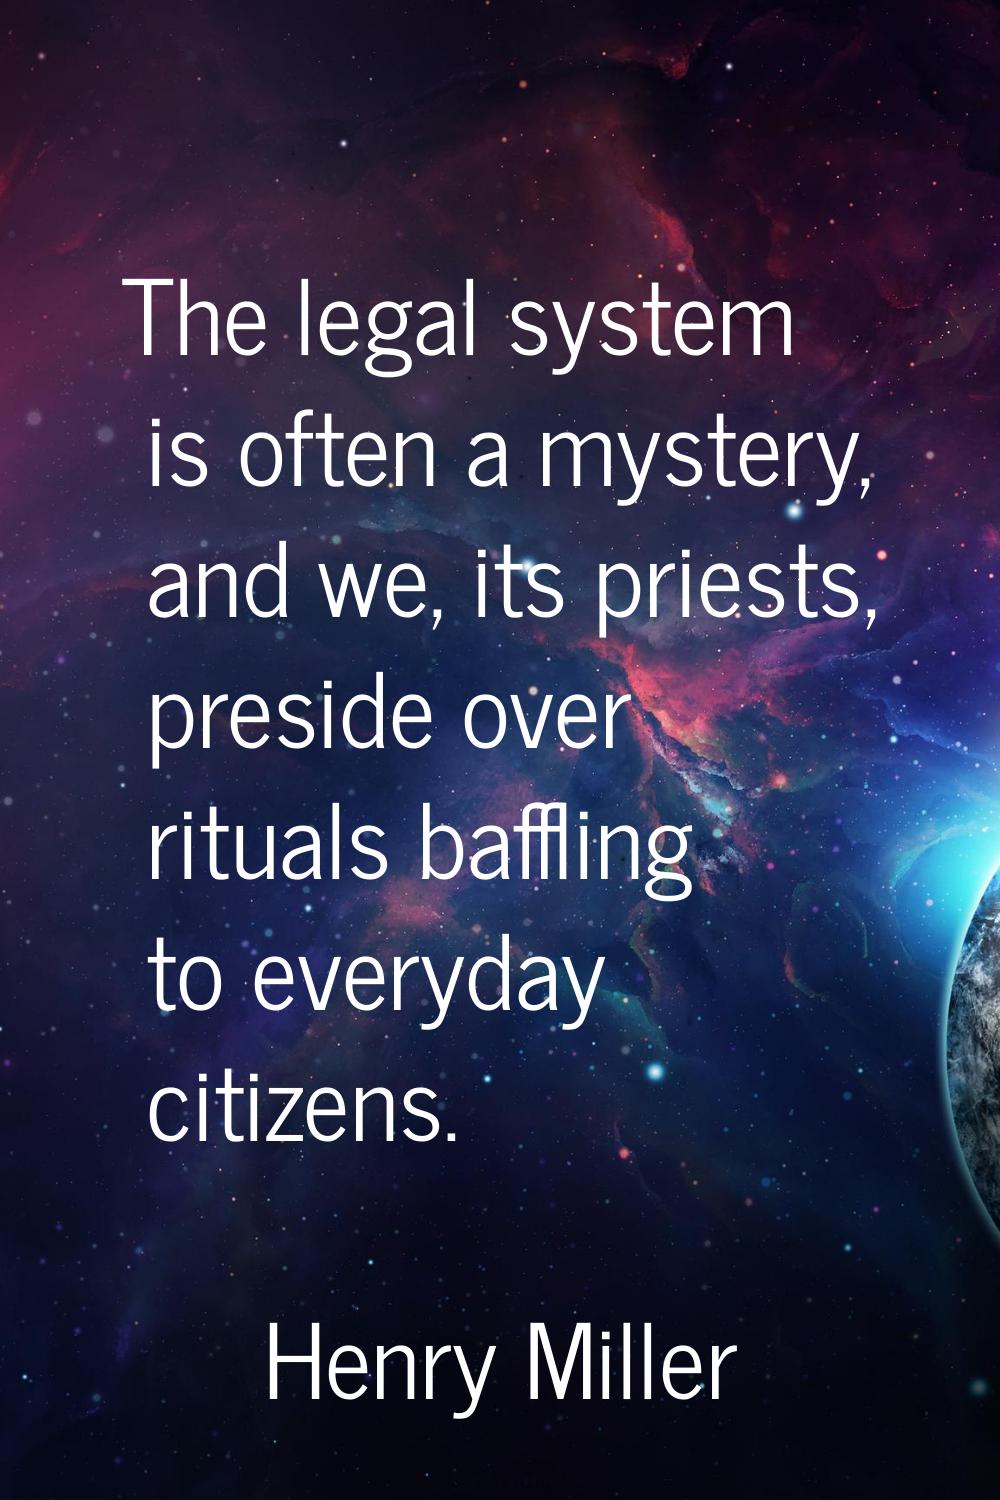 The legal system is often a mystery, and we, its priests, preside over rituals baffling to everyday